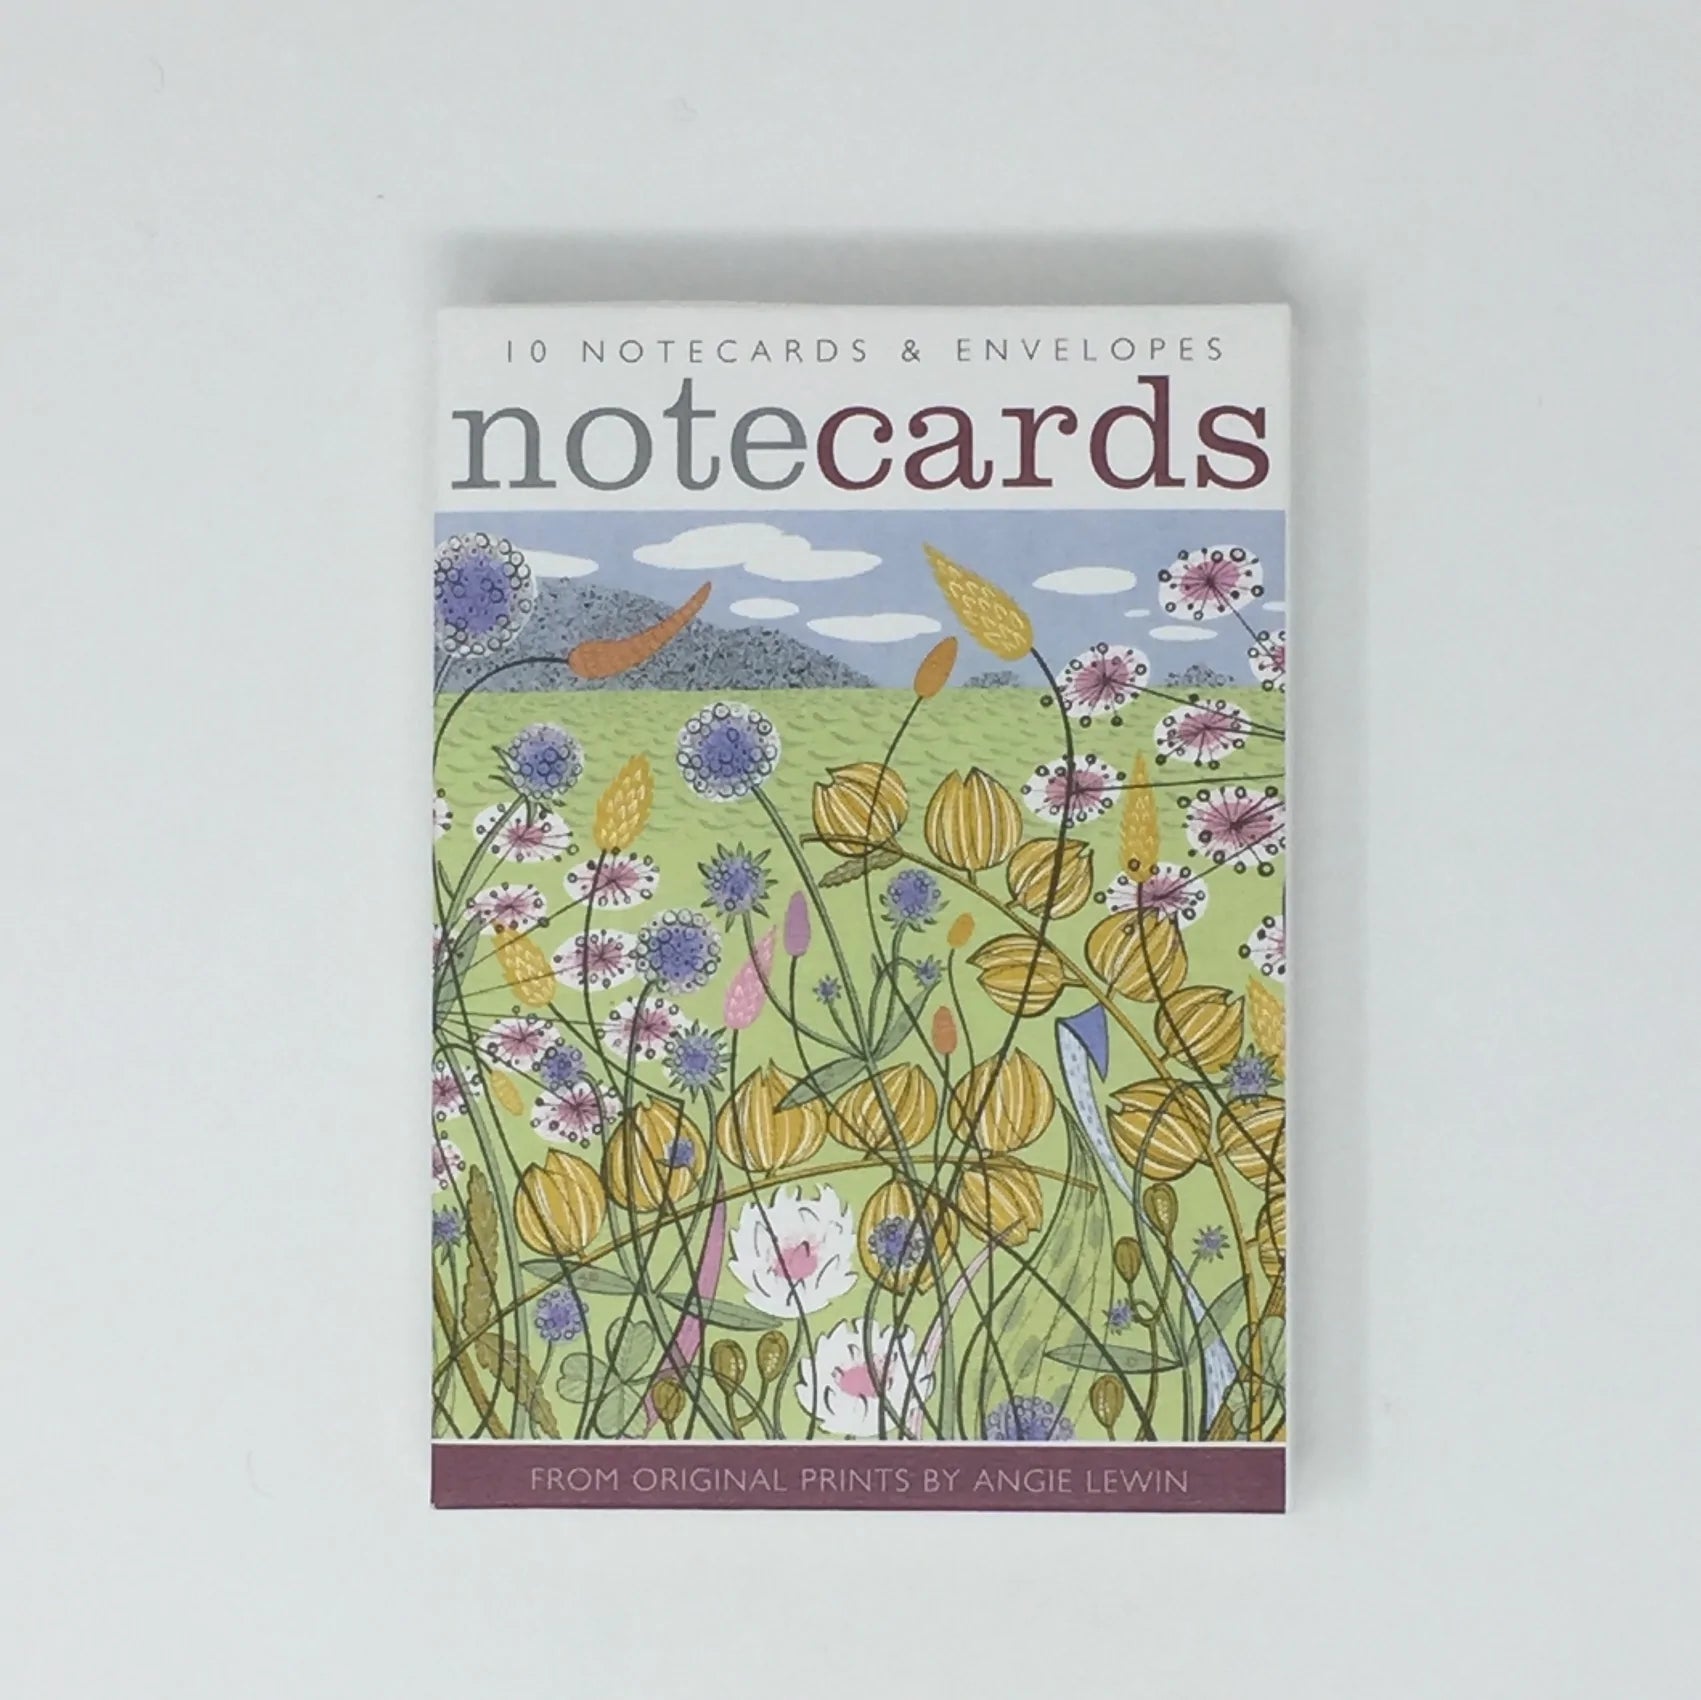 10 Floral Notecards and Envelopes by Angie Lewin